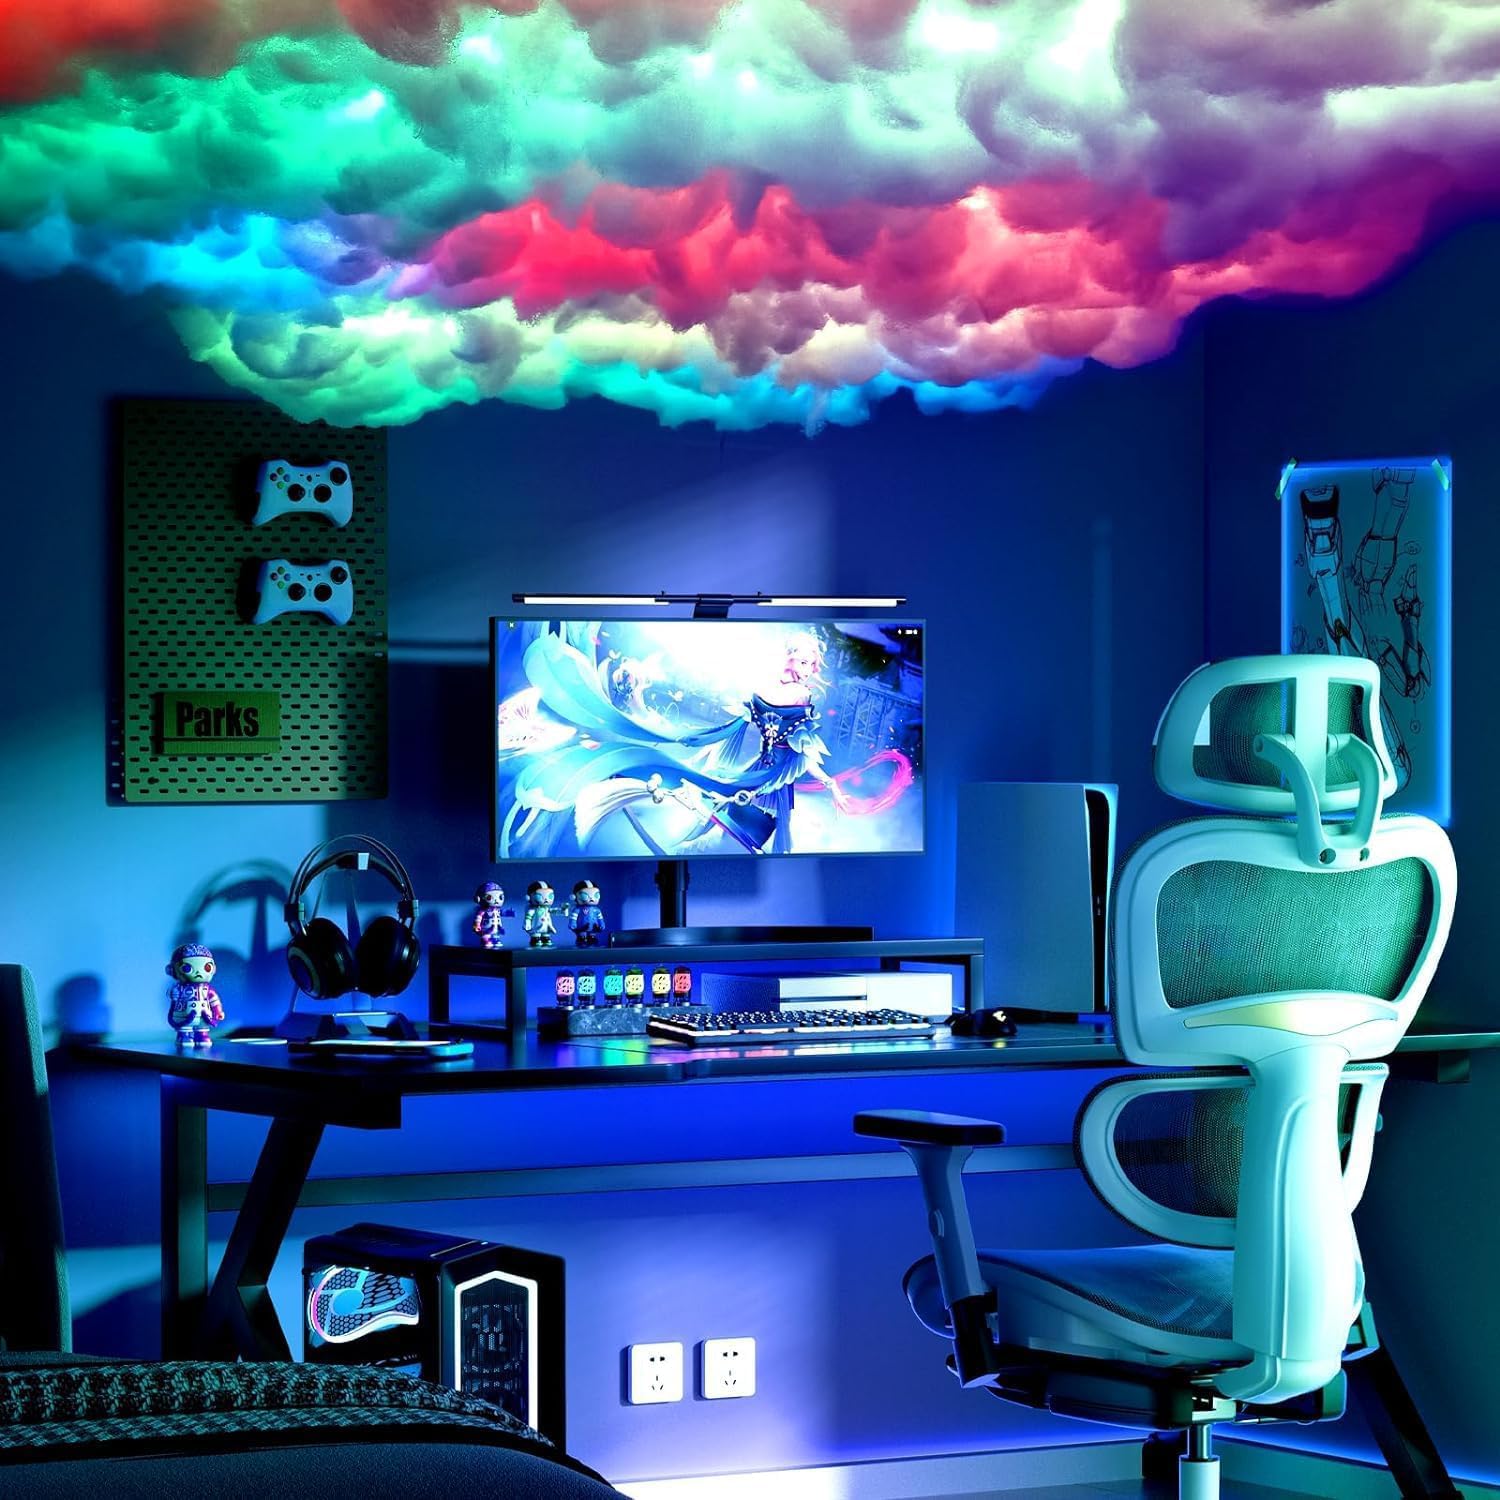 Thundercloud 3D Color Changing LED Lighting Kit with Remote Control 3D Mood Light for Bar, Game Room, Bedroom, Party, Ceiling Decoration,5M